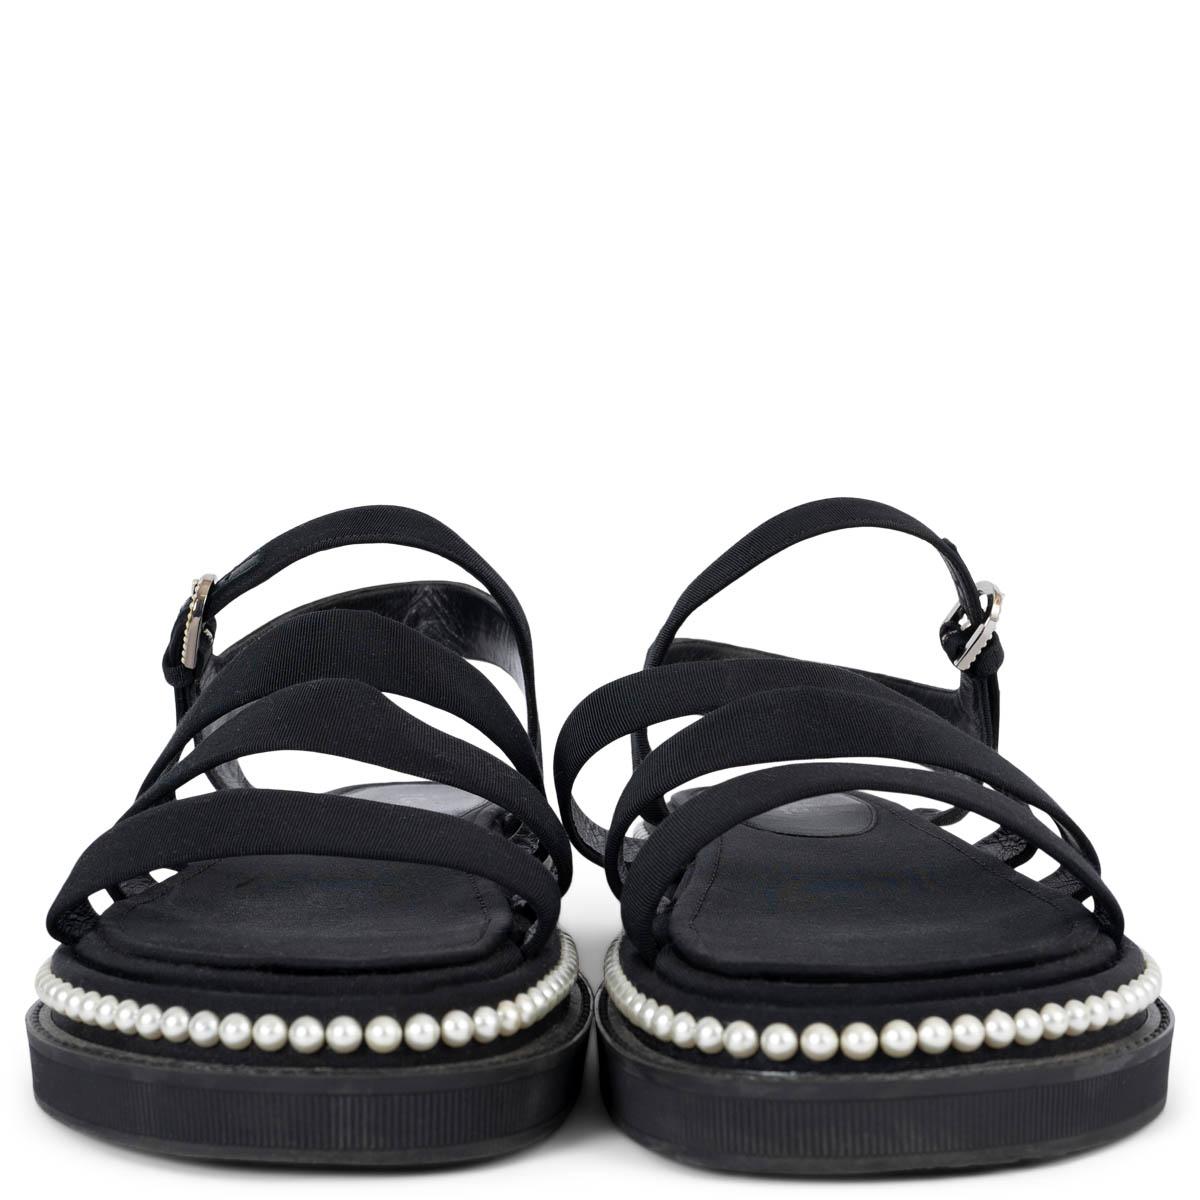 100% authentic Chanel 2017 REV pearl embellished flat sandals in black grosgrain. They feature grosgrain straps, ankle fastenings and the faux pearl embellishments. Have been worn and two tiny pearls are missing on the right shoe's CC logo on the